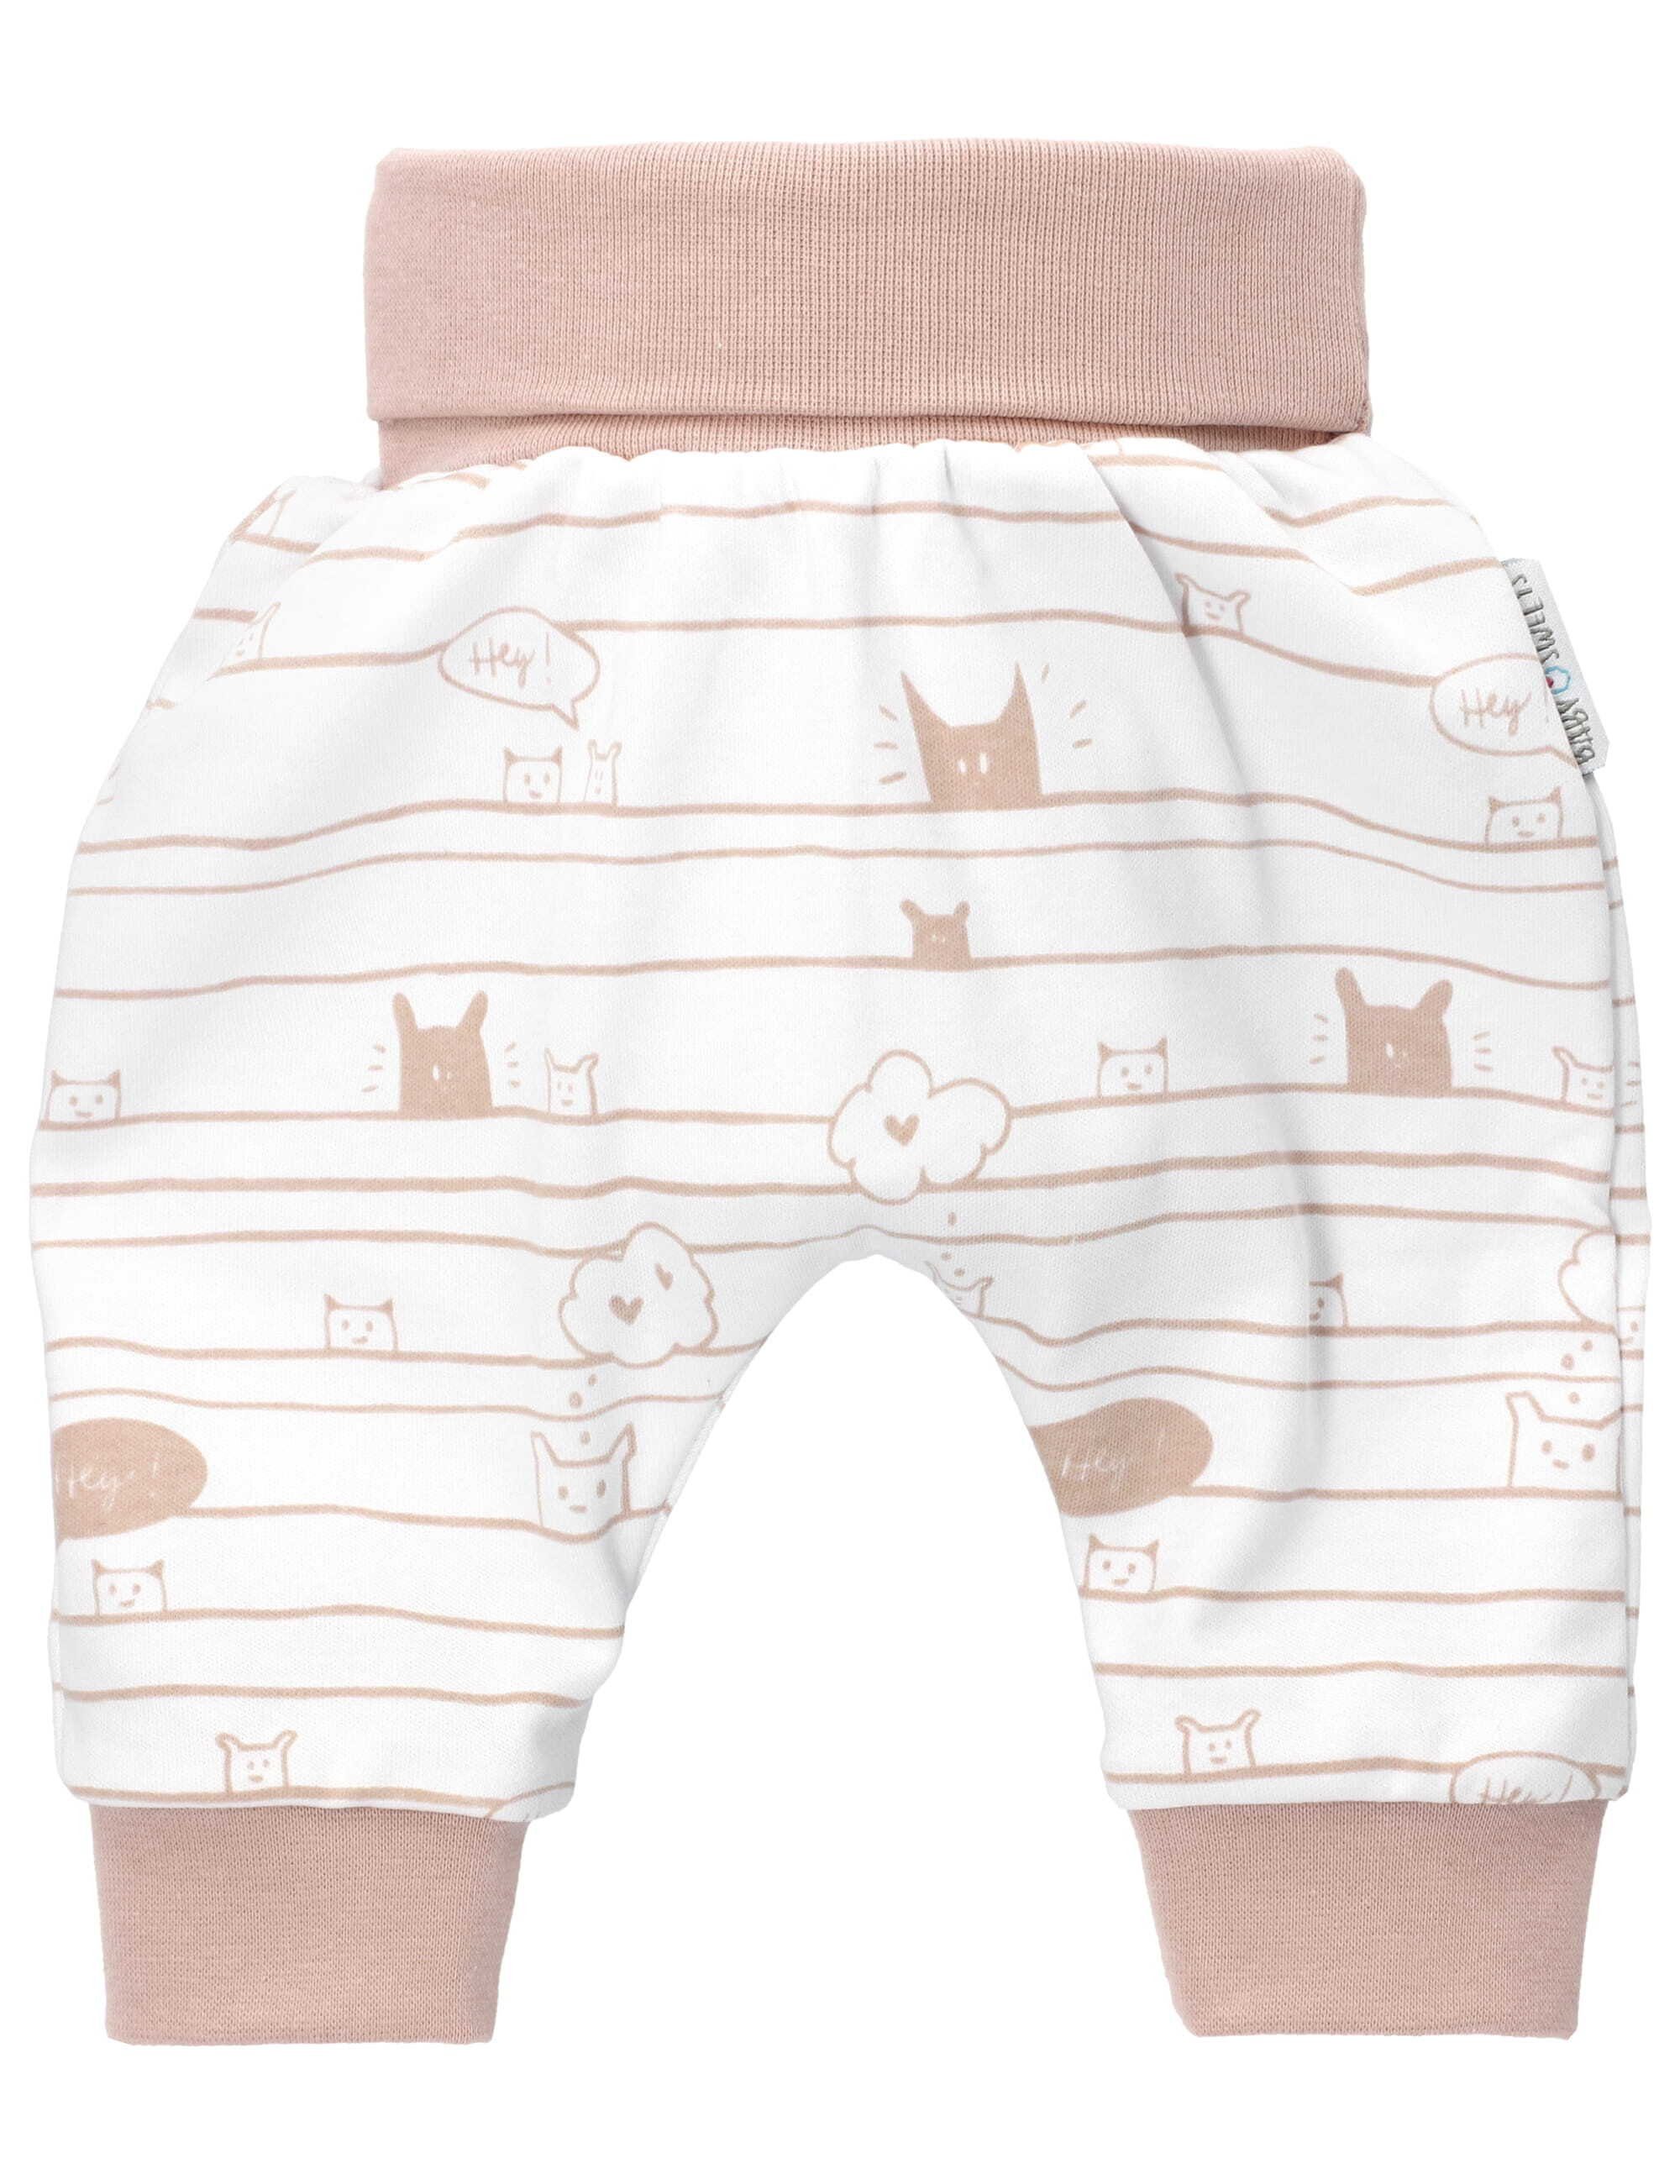 & Body Baby creme (3-tlg., Sweets Teile) Hose 3 Set beige Tiere